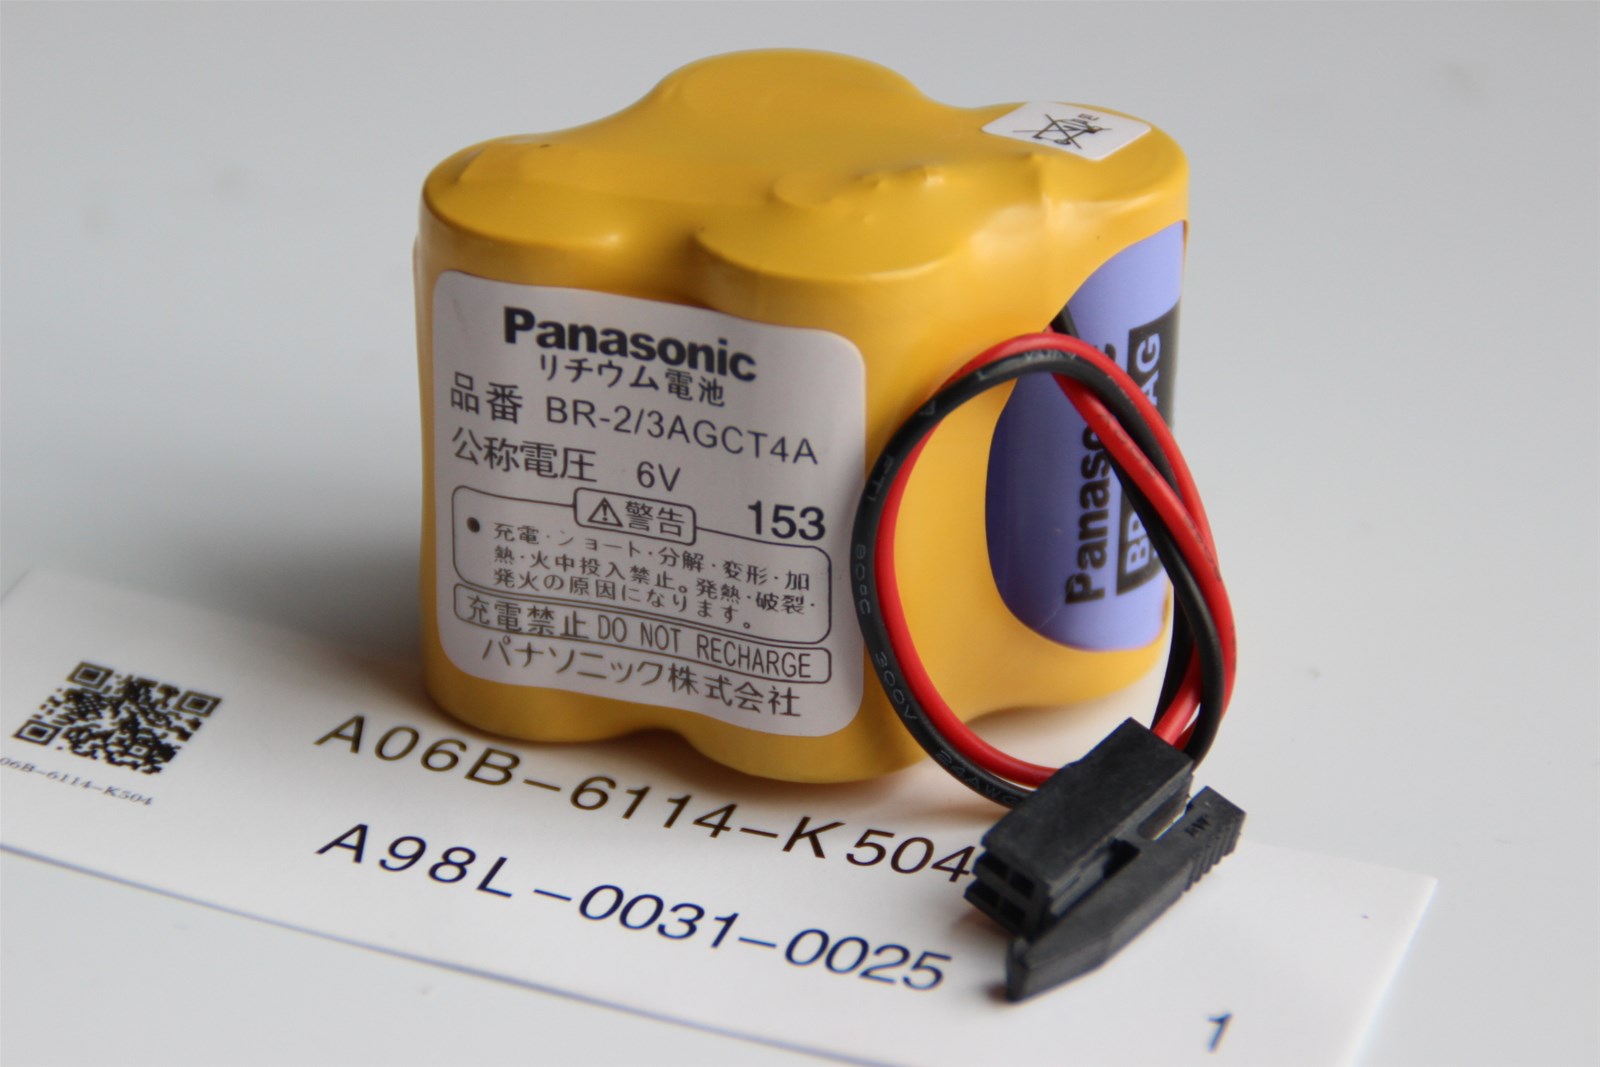 Panasonic Controls Brown Connector PLC Computer Ge Fanuc A06 Series A98l-0001-0902 BR-CCF2TE CNC Coaster BR-CCF2TH 6V Lithium Replacement Battery for Fanuc oi Mate Model-D 3-Pack Cutler Hammer